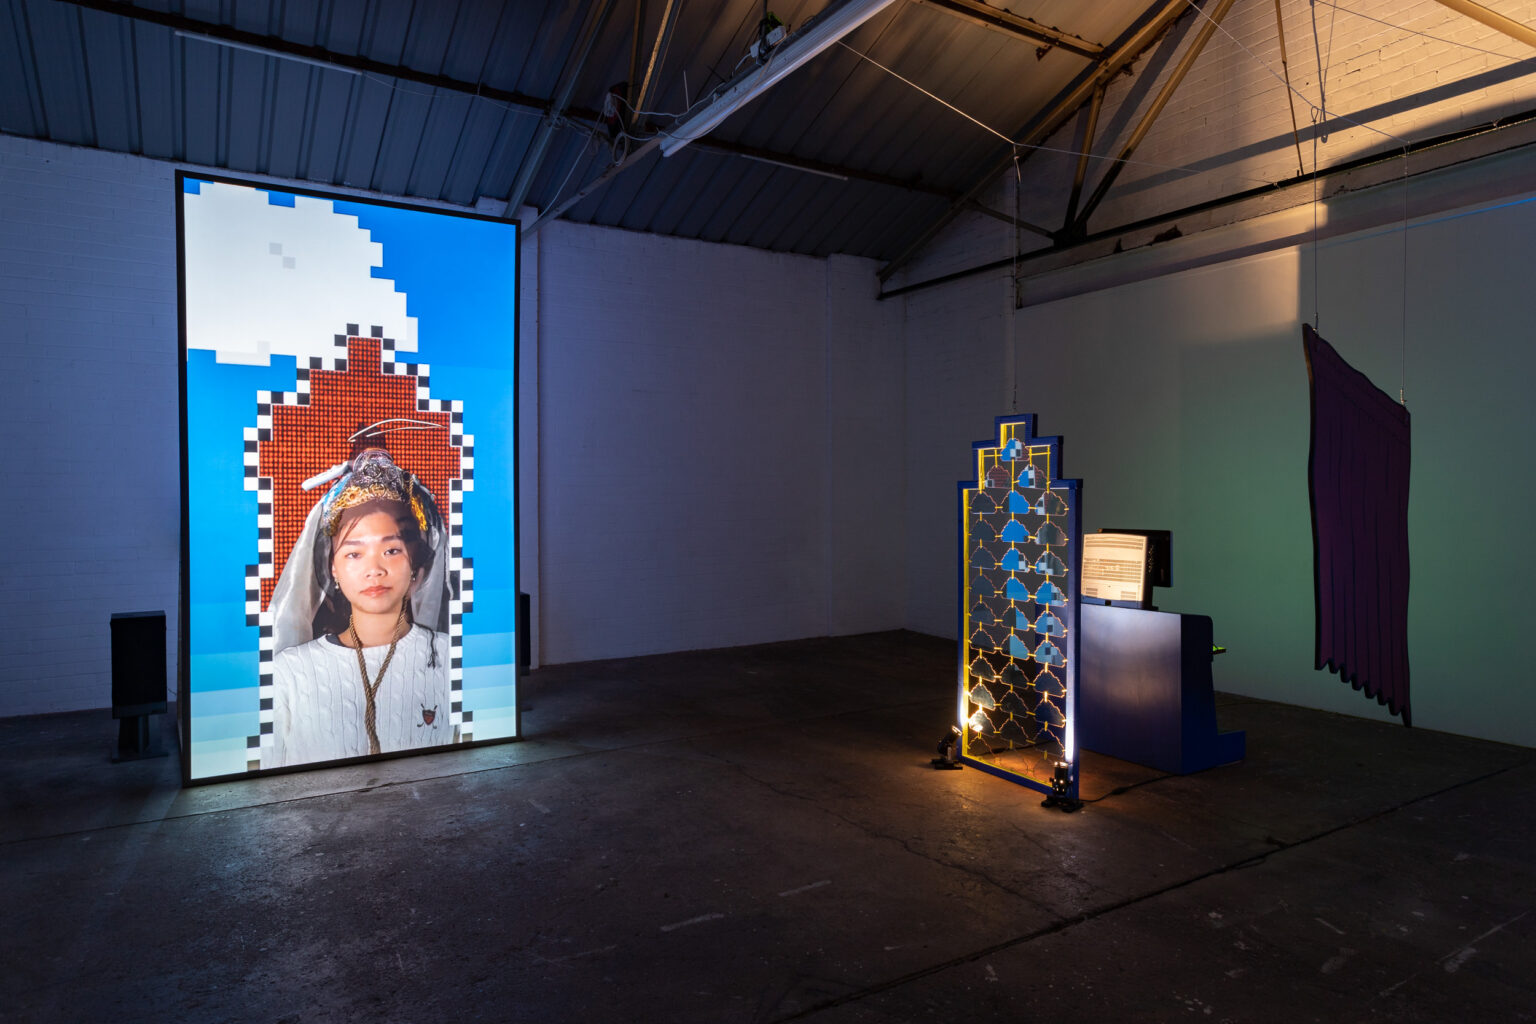 A vertical screen showing a figure in a medieval-inspired dress, framed in a pixelated arch. To the right is a doorframe filled with perspex clouds held together in a grille structure. Behind is a computer terminal and a hanging painted curtain.